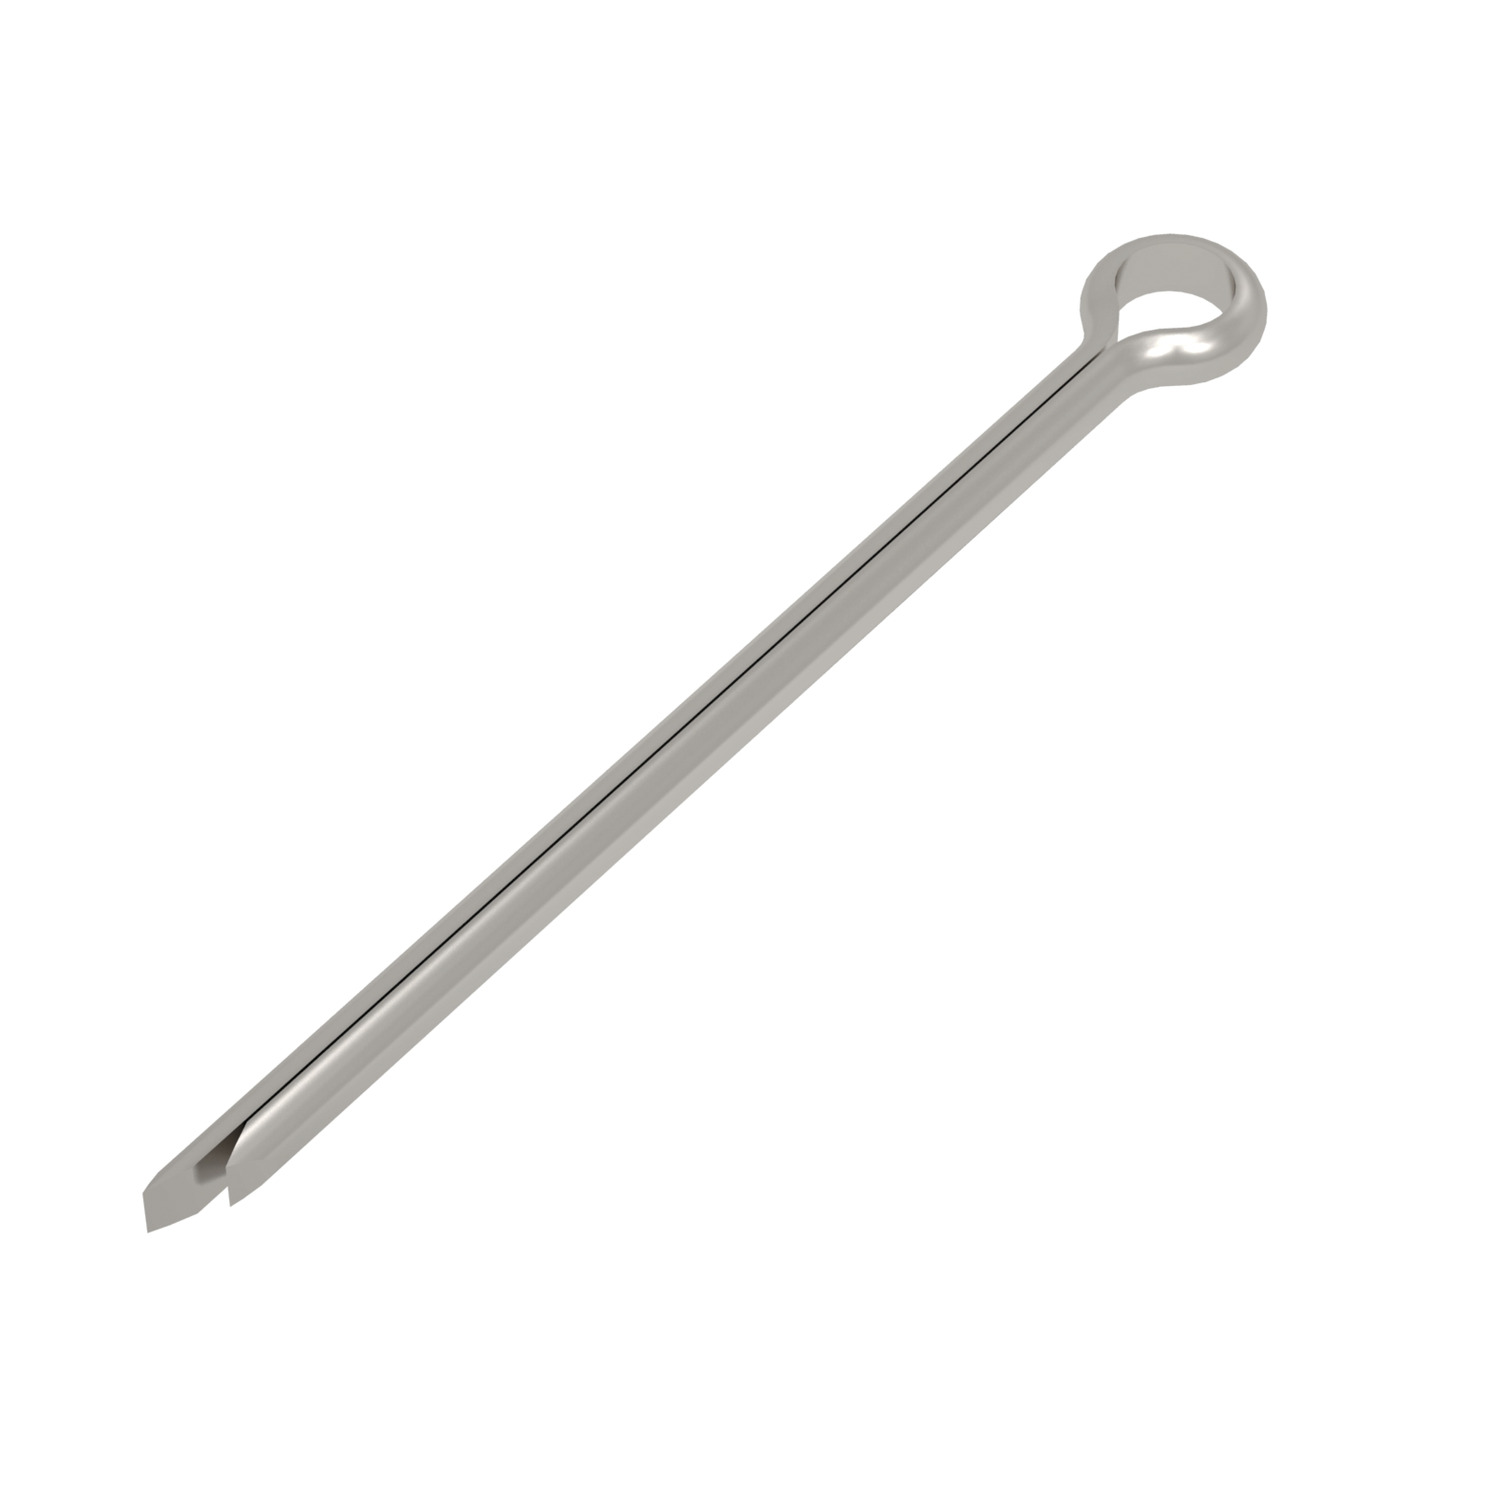 P1241 - Stainless Cotter Pins